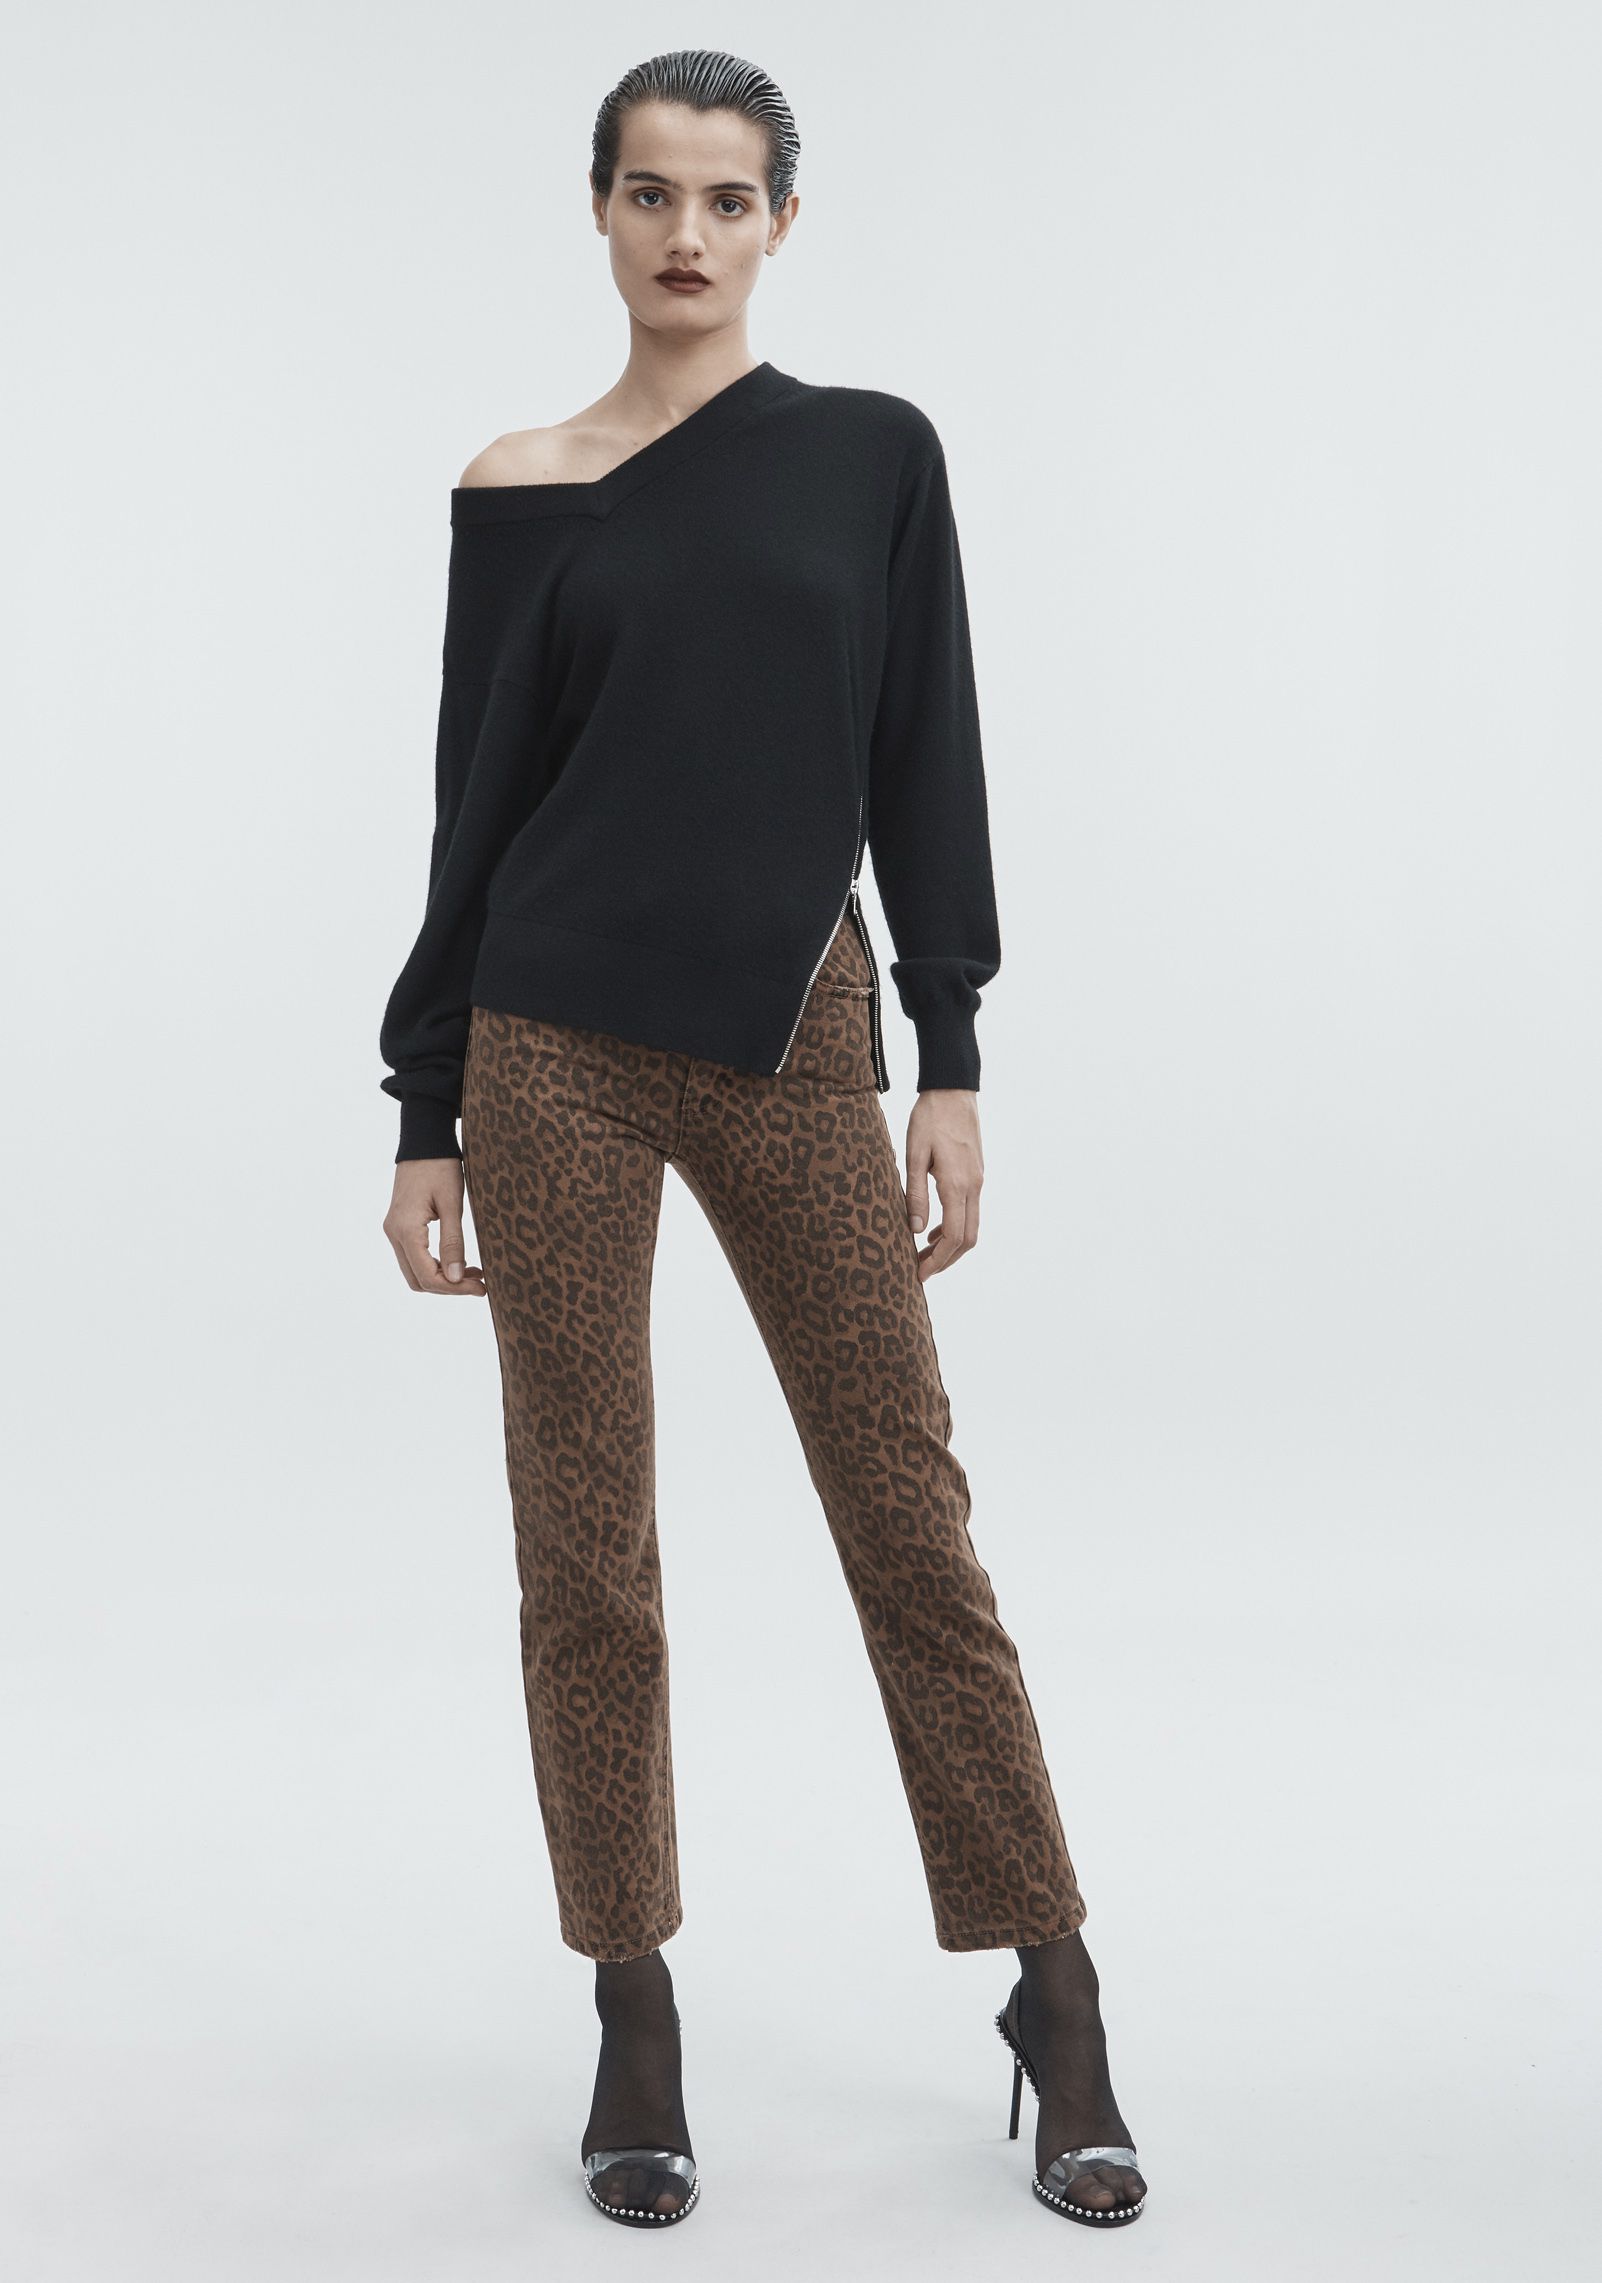 Fall Sweaters: Finding the Perfect Look for a Night on the Town Alexander Wang